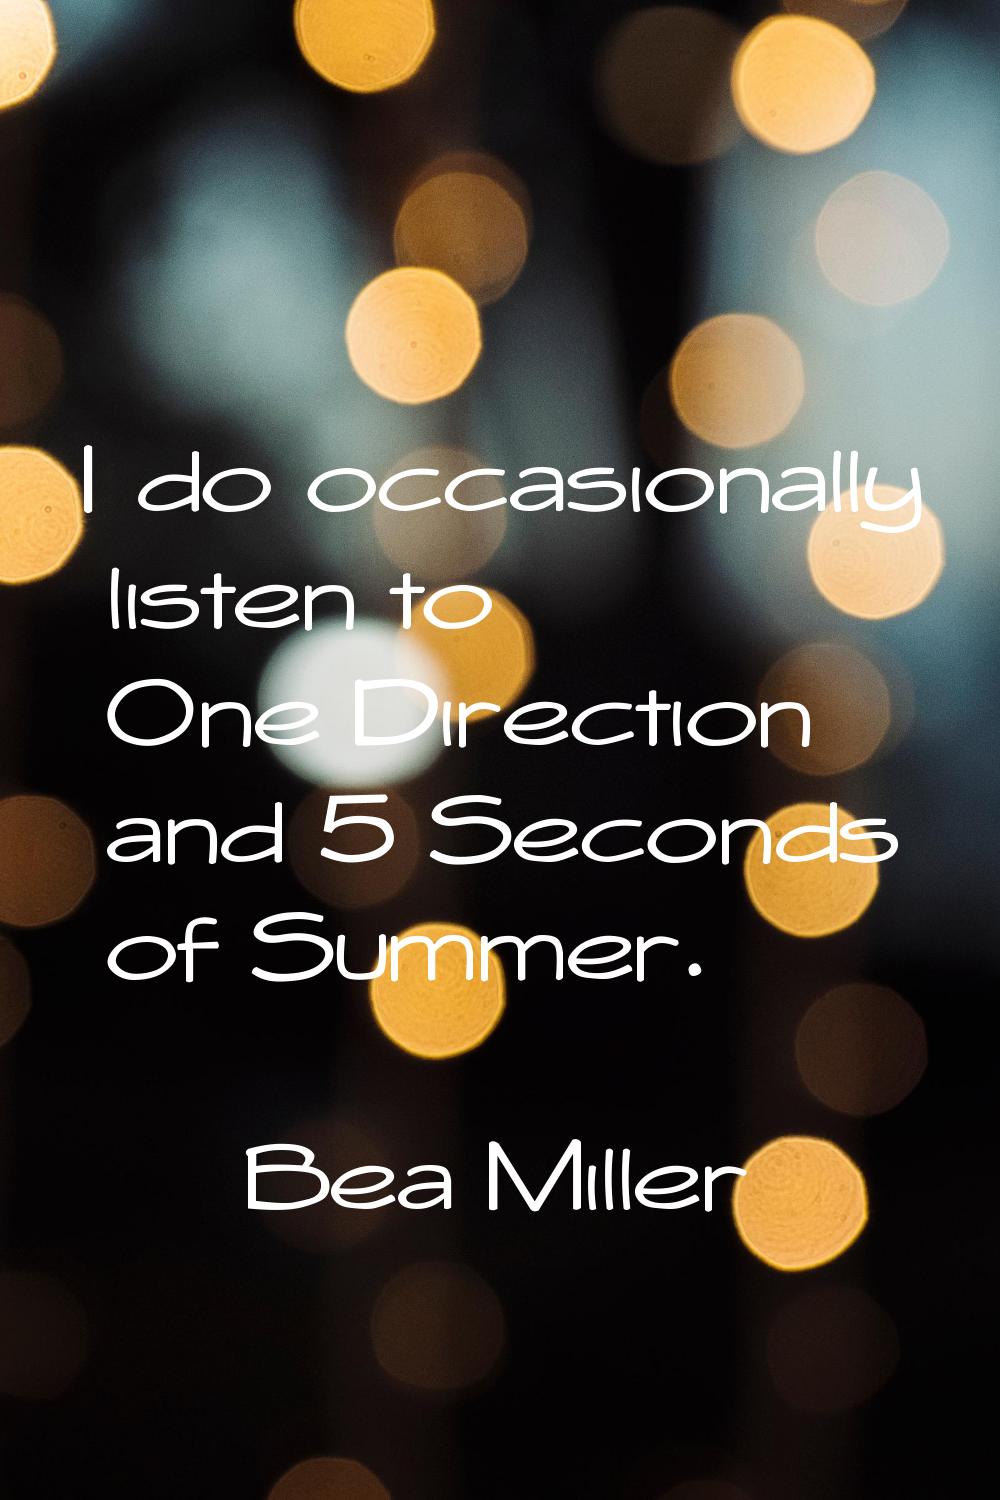 I do occasionally listen to One Direction and 5 Seconds of Summer.